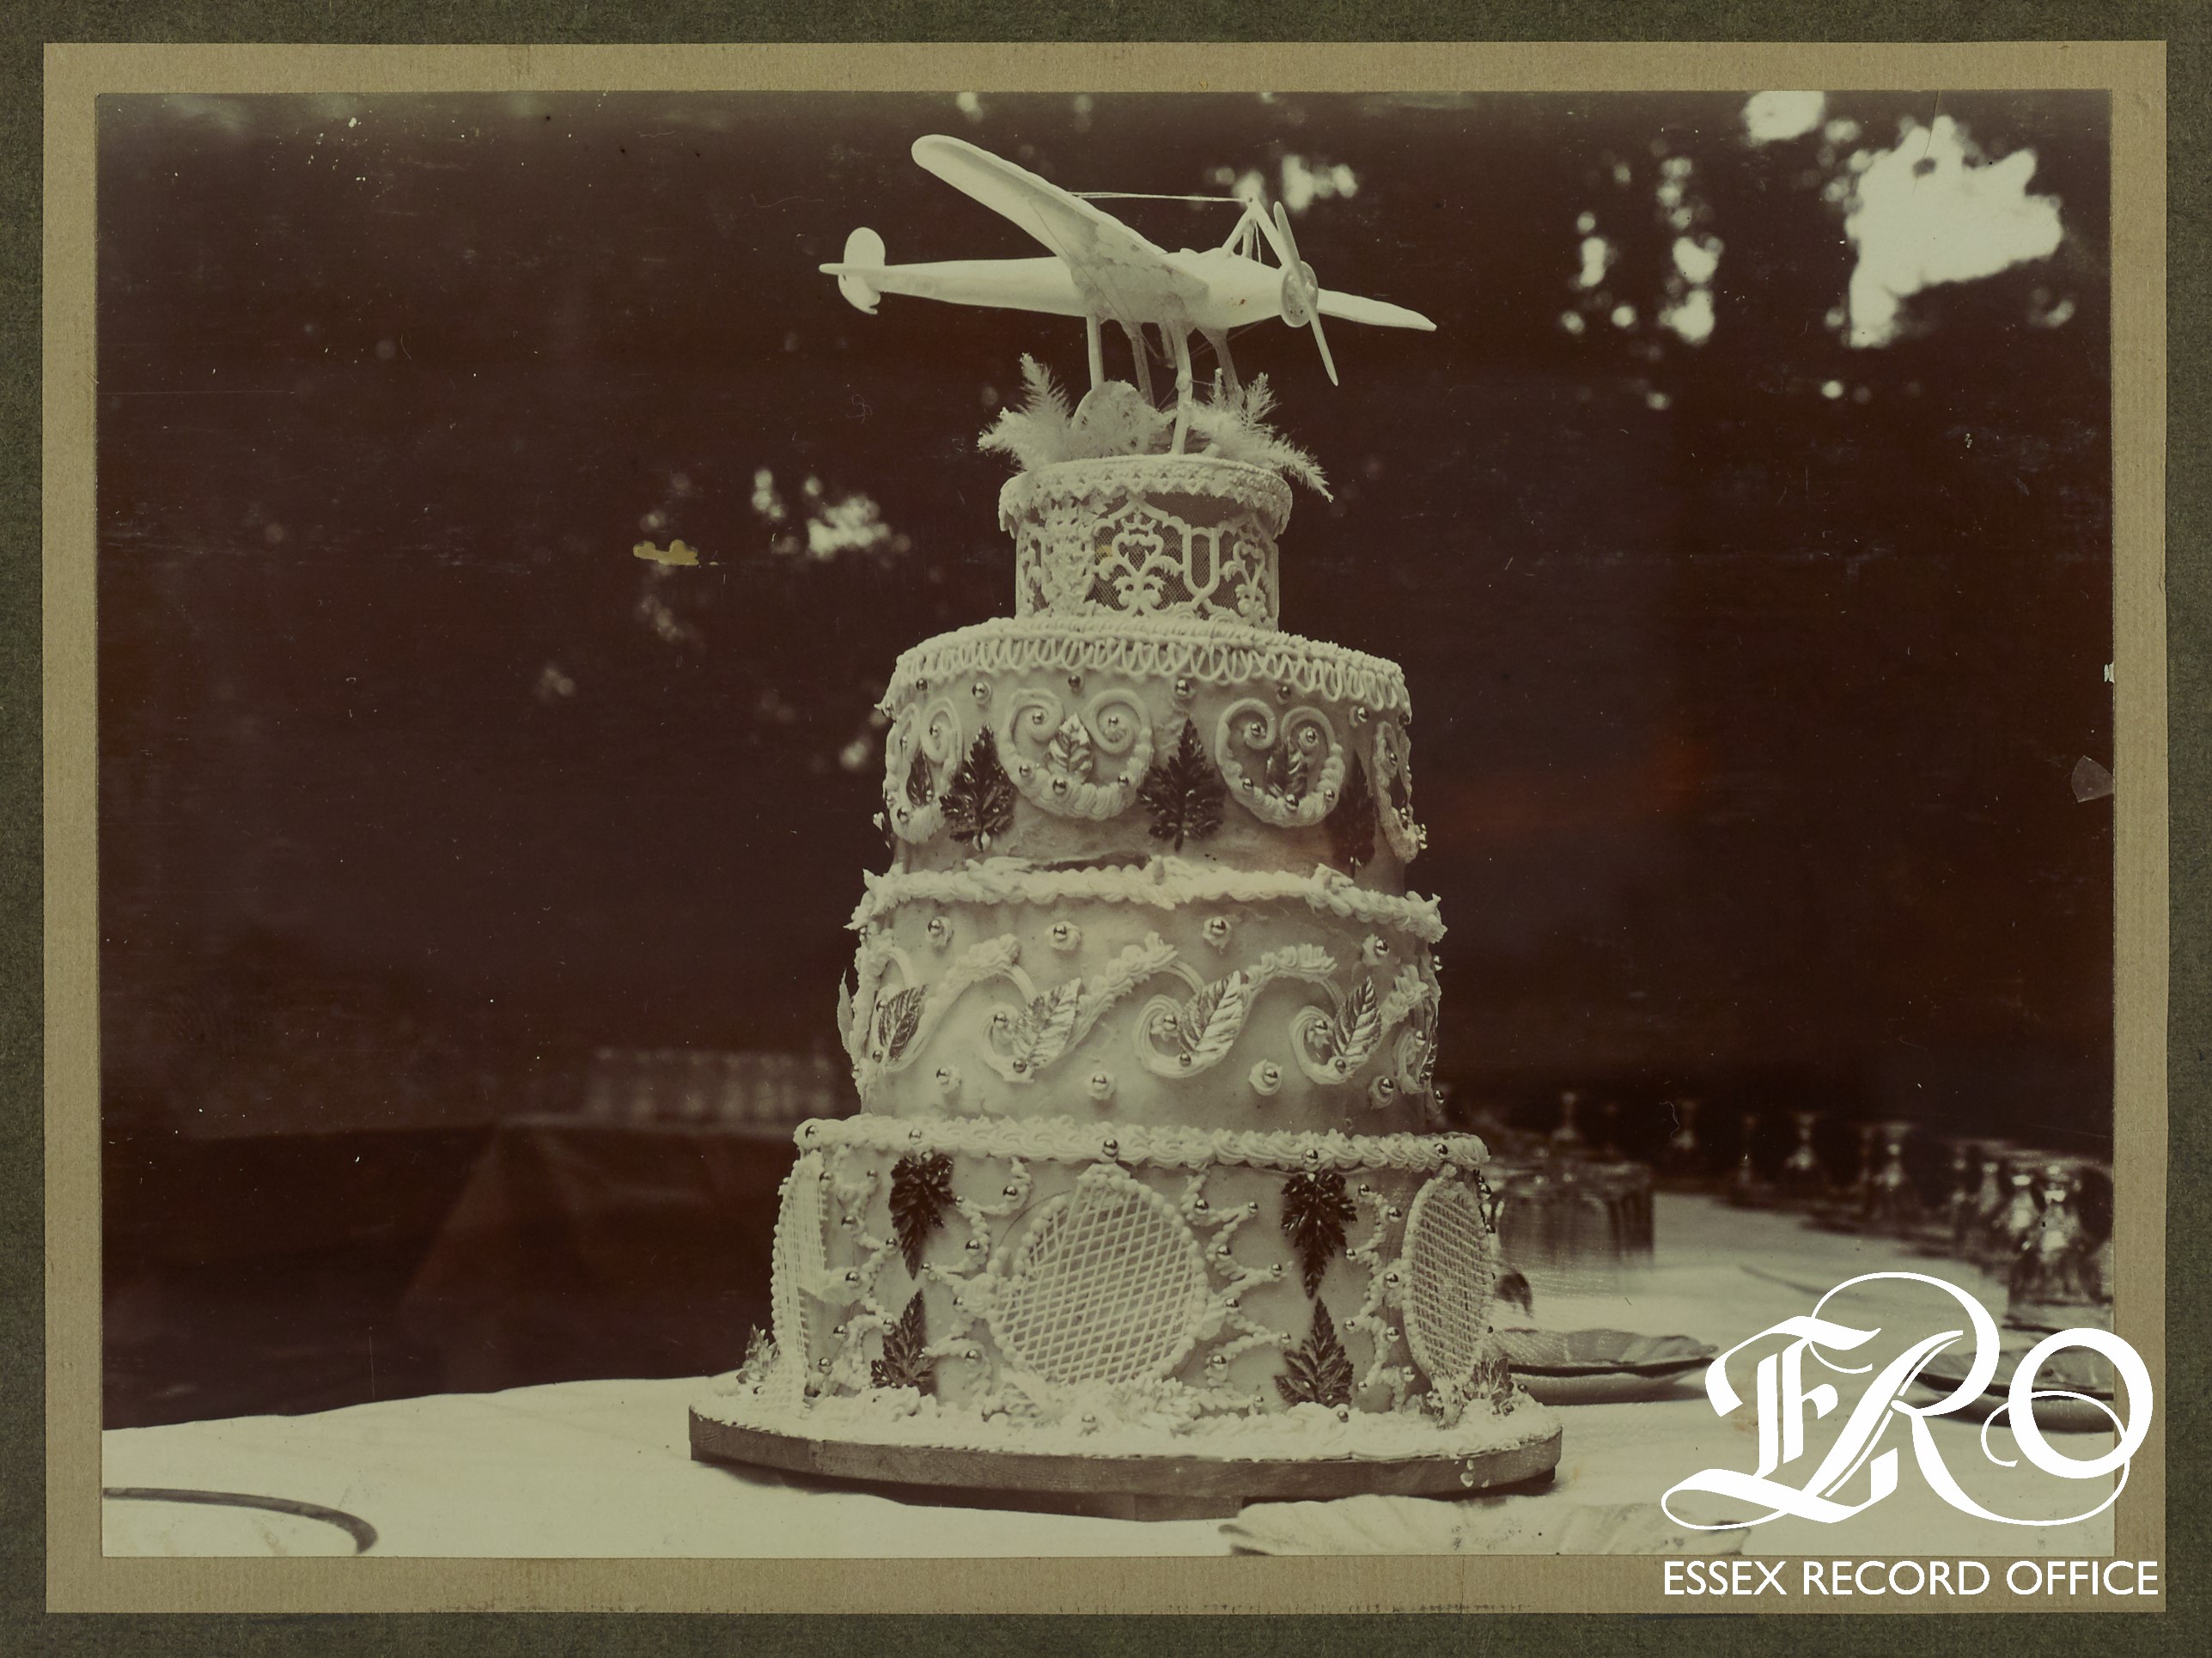 Ornate, four tiered cake topped with a model aeroplane